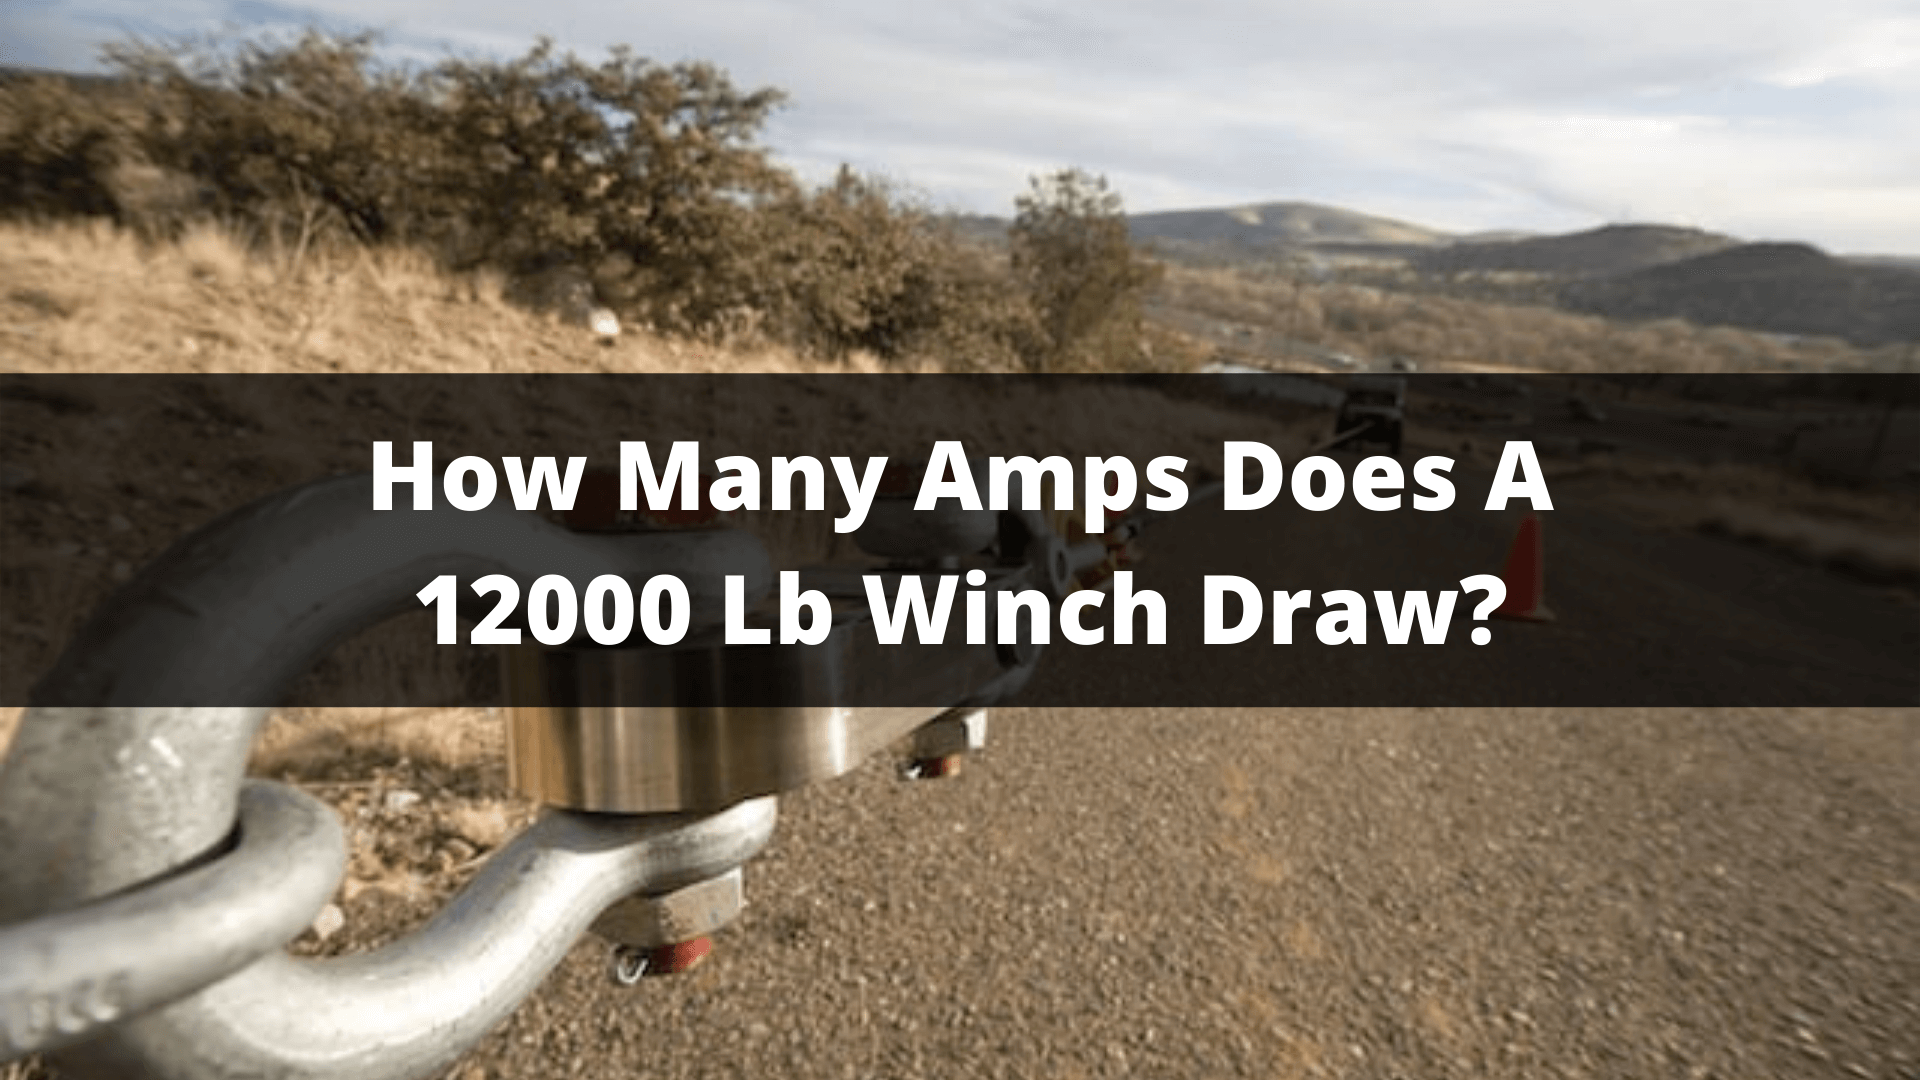 How Many Amps Does A 12000 Lb Winch Draw?